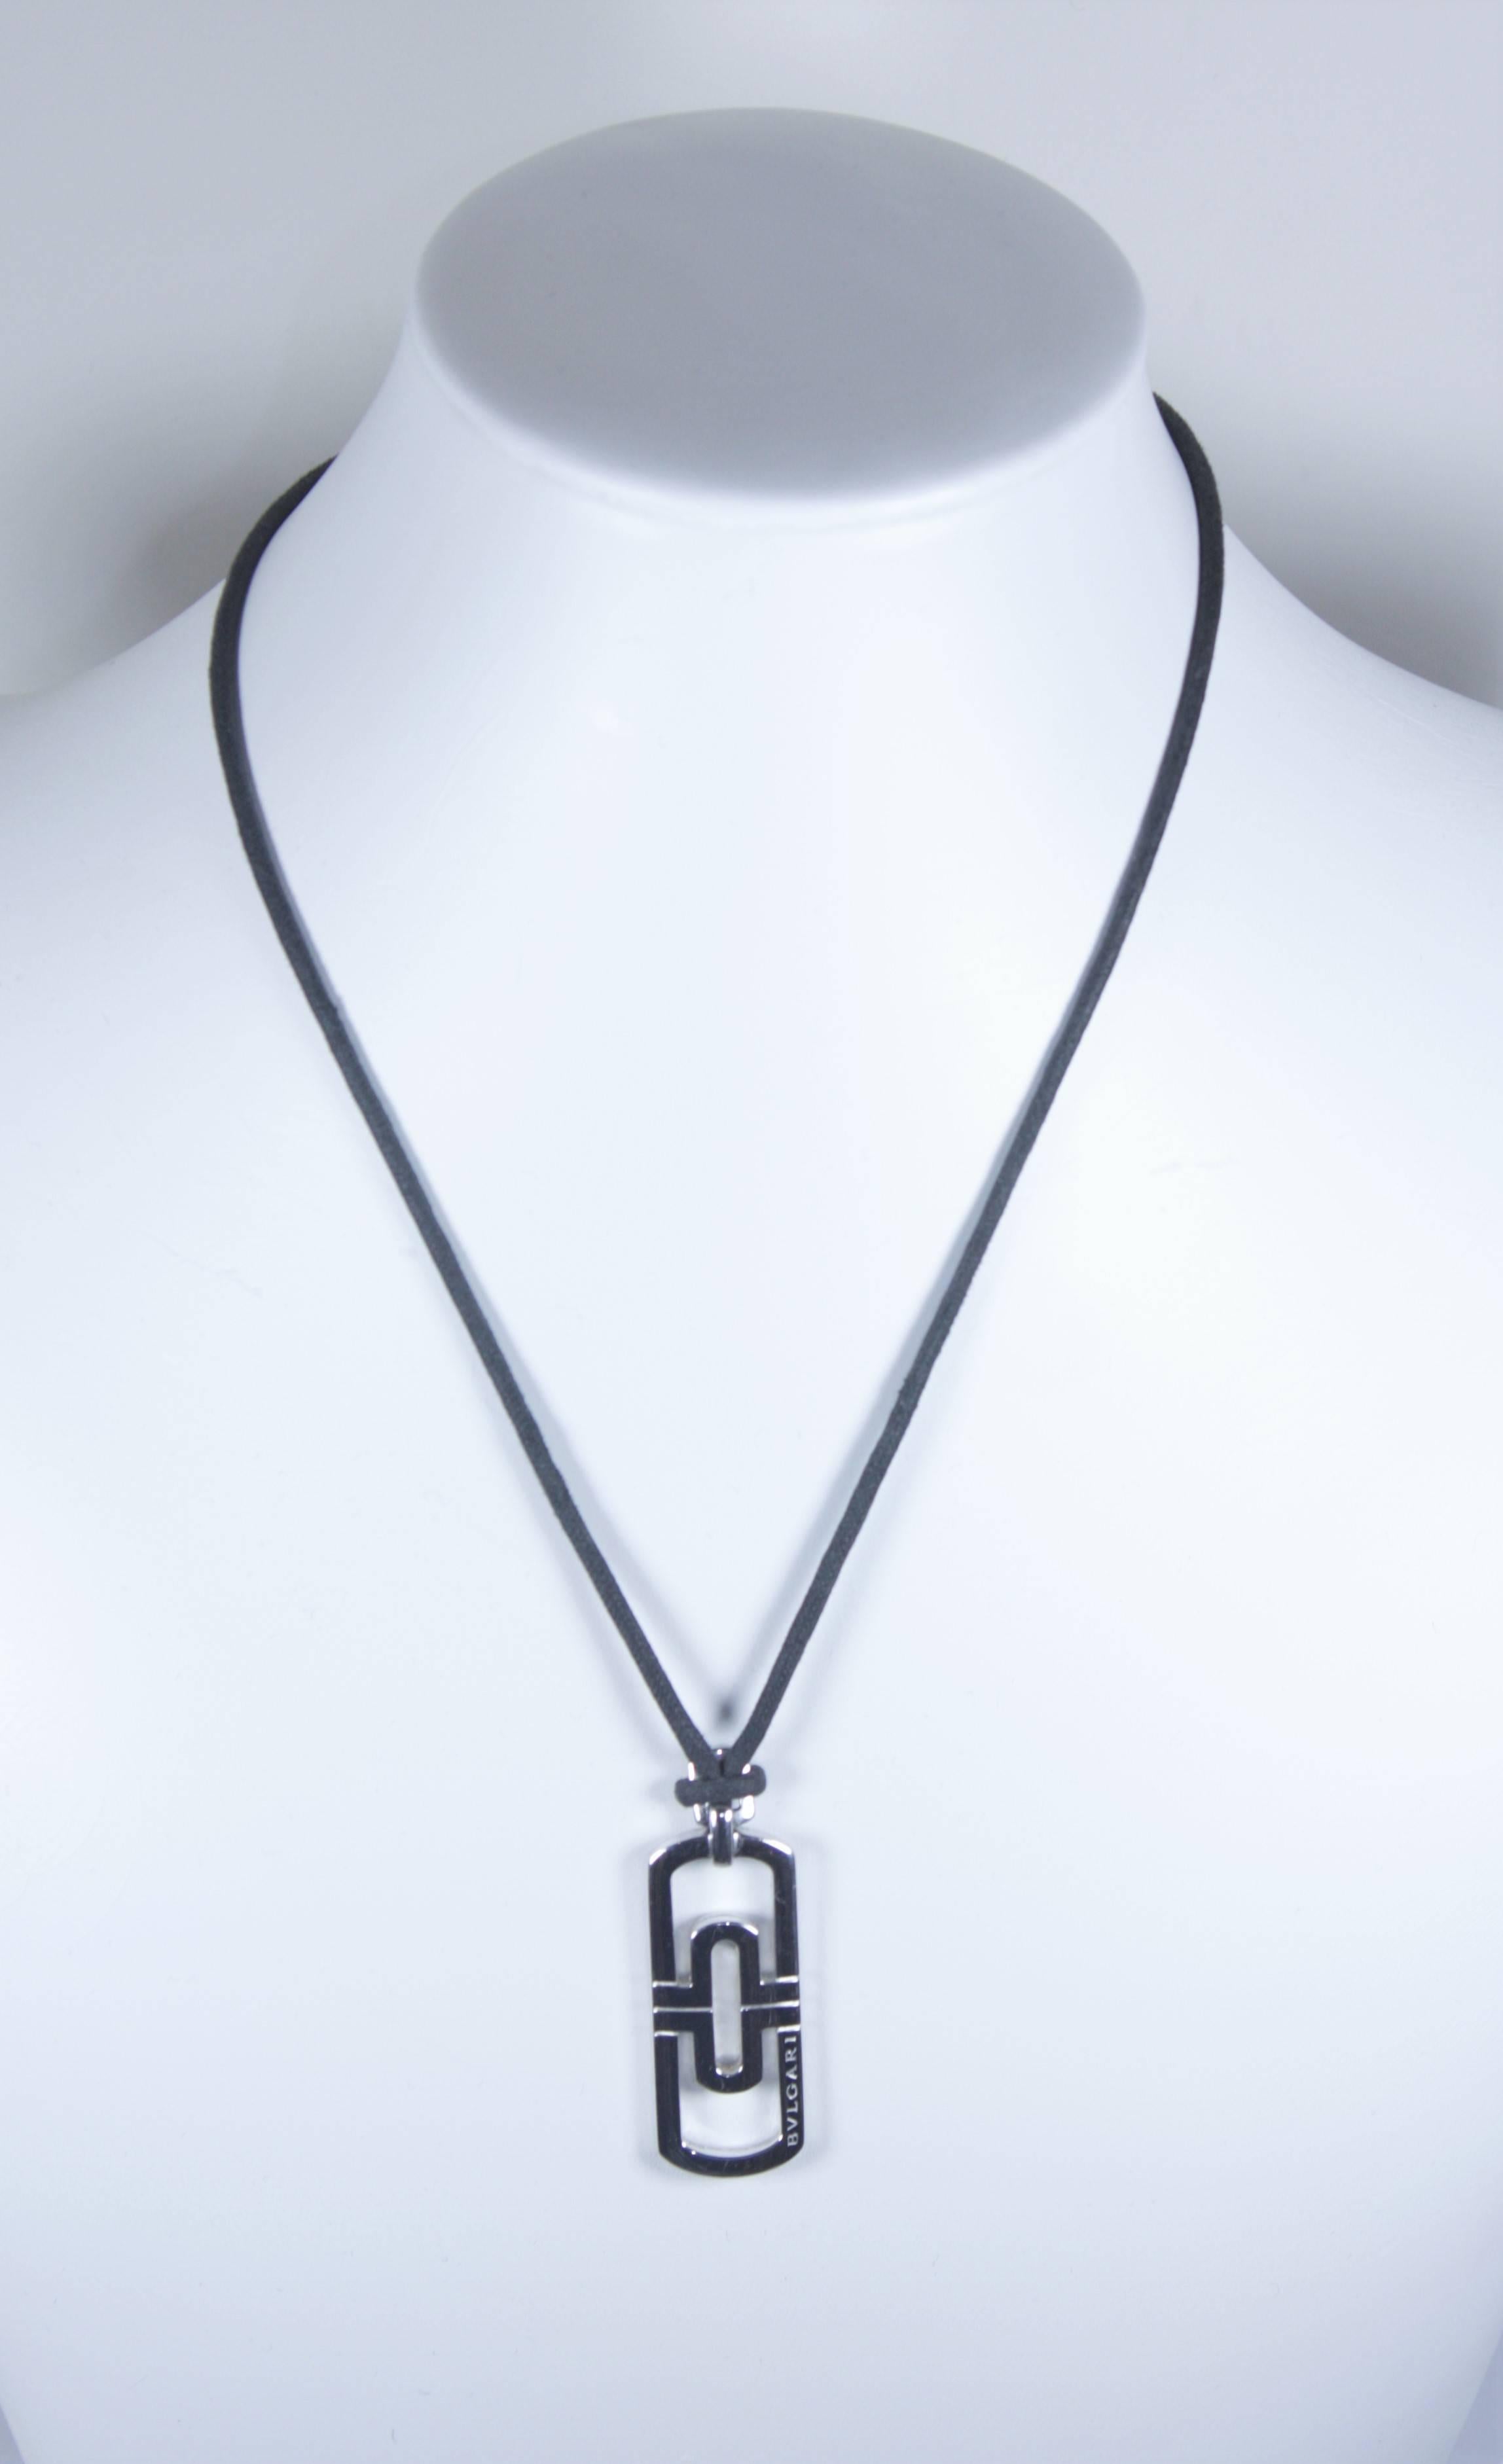 This Bvlgari necklace features a lariat rope style with 14kt white gold. In excellent pre-owned condition.

Specs: 
14KT White Gold 
Length: up to 22